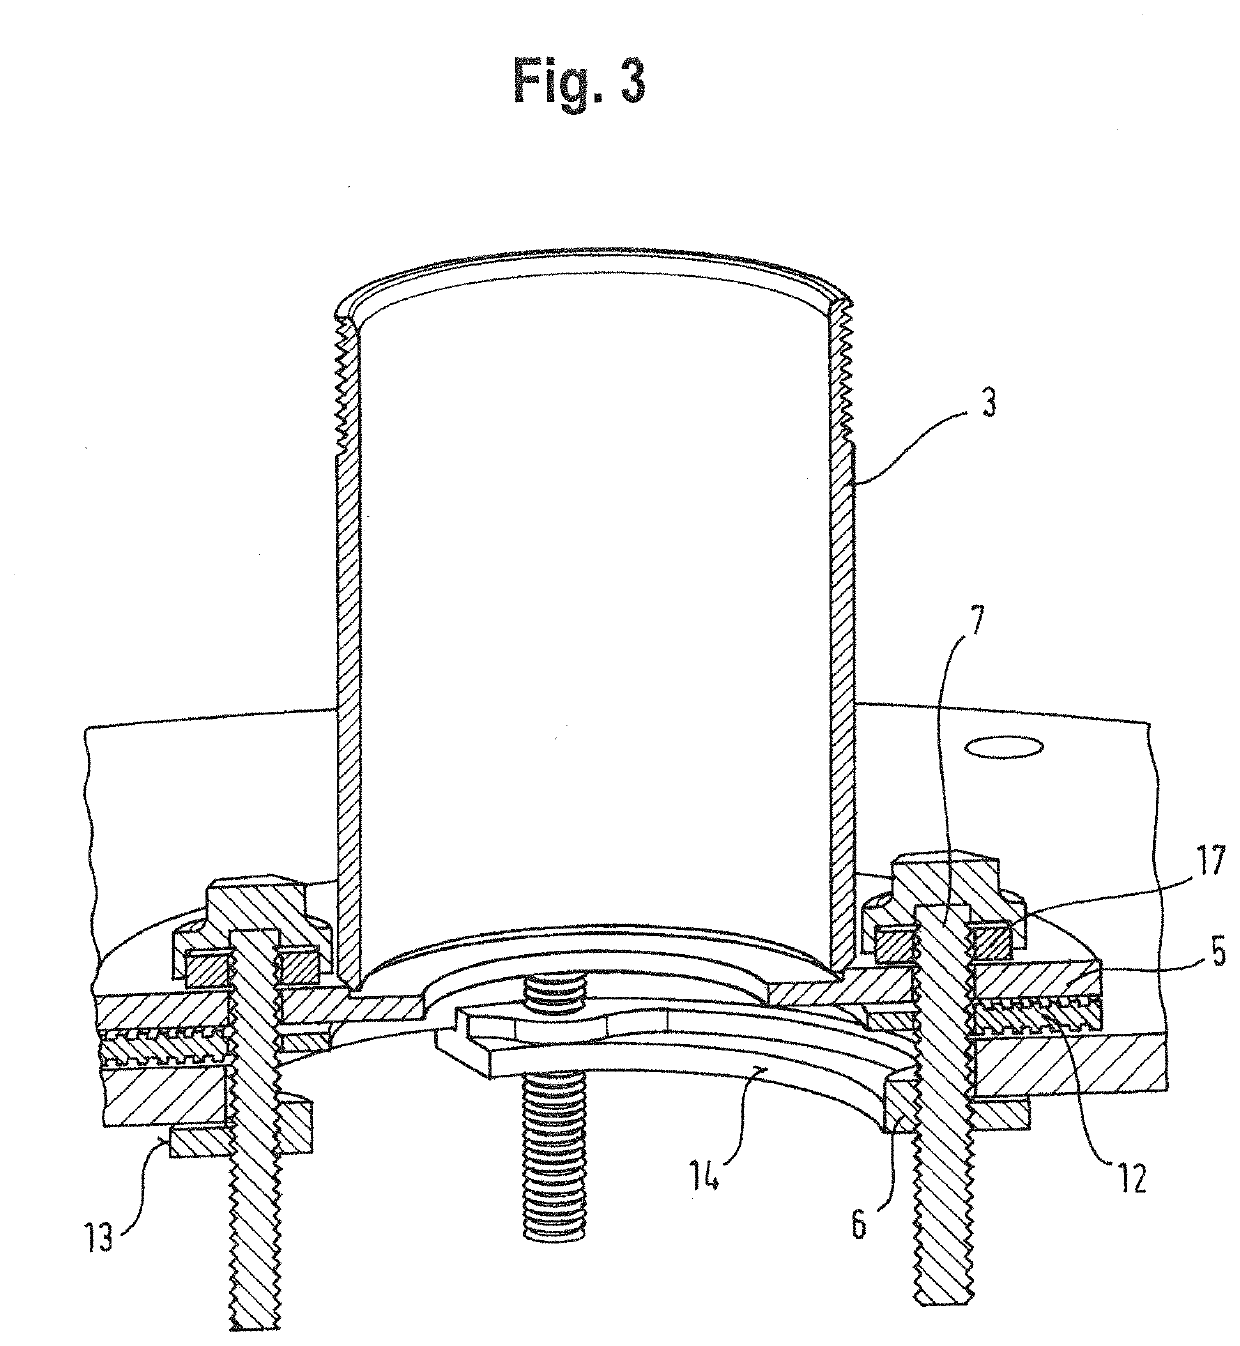 System and method for providing a conduit sealingly to a through-opening in a plate-shaped construction element